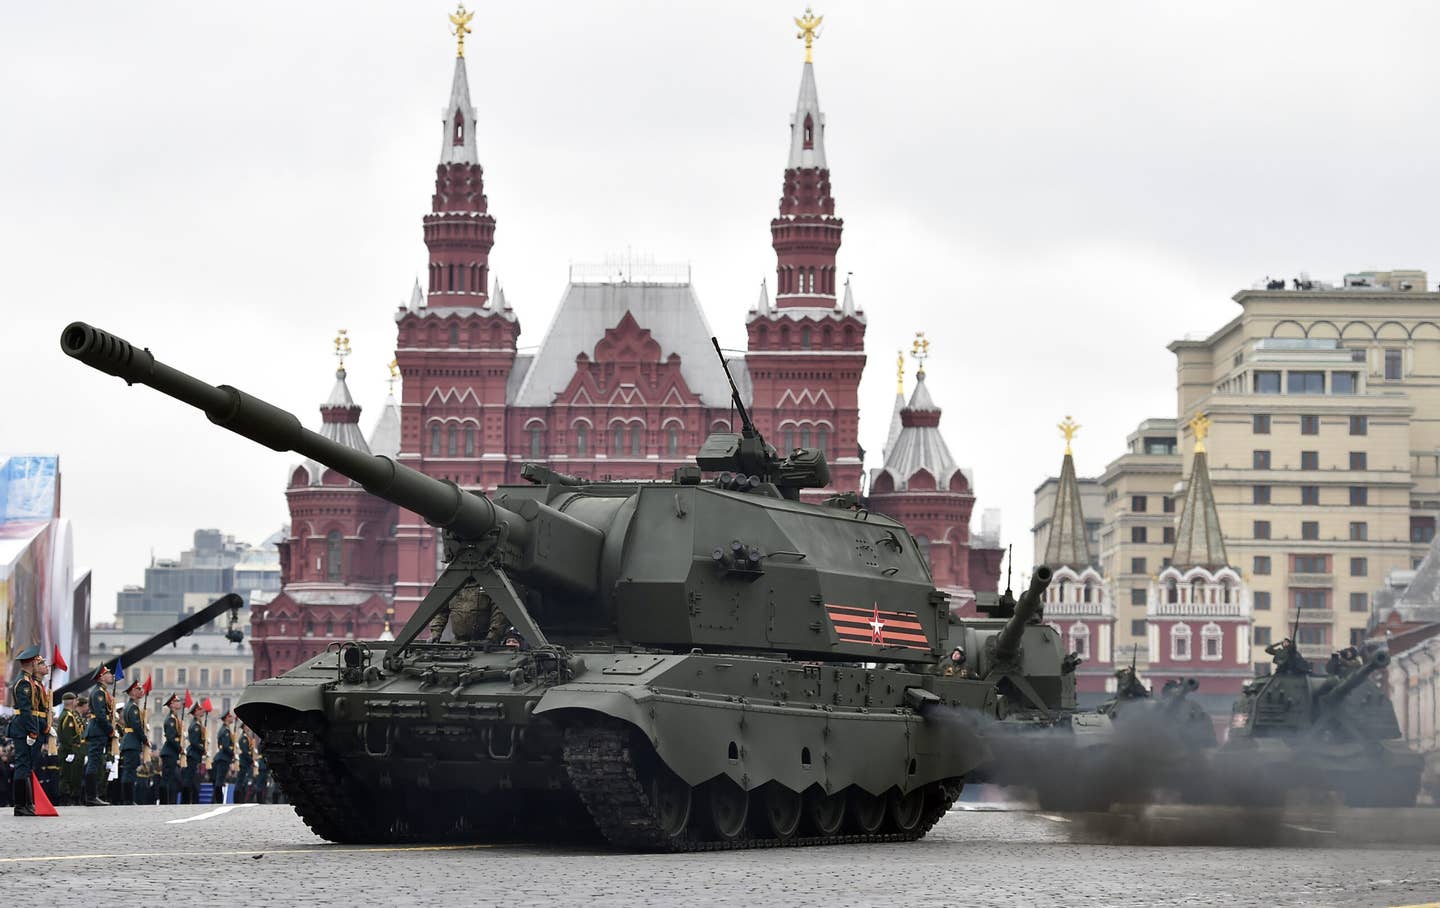 Single-barrel 2S35 Koalitsiya-SV self-propelled guns ride through Red Square during the Victory Day military parade in Moscow on May 9, 2017. <em>NATALIA KOLESNIKOVA/AFP via Getty Images</em>